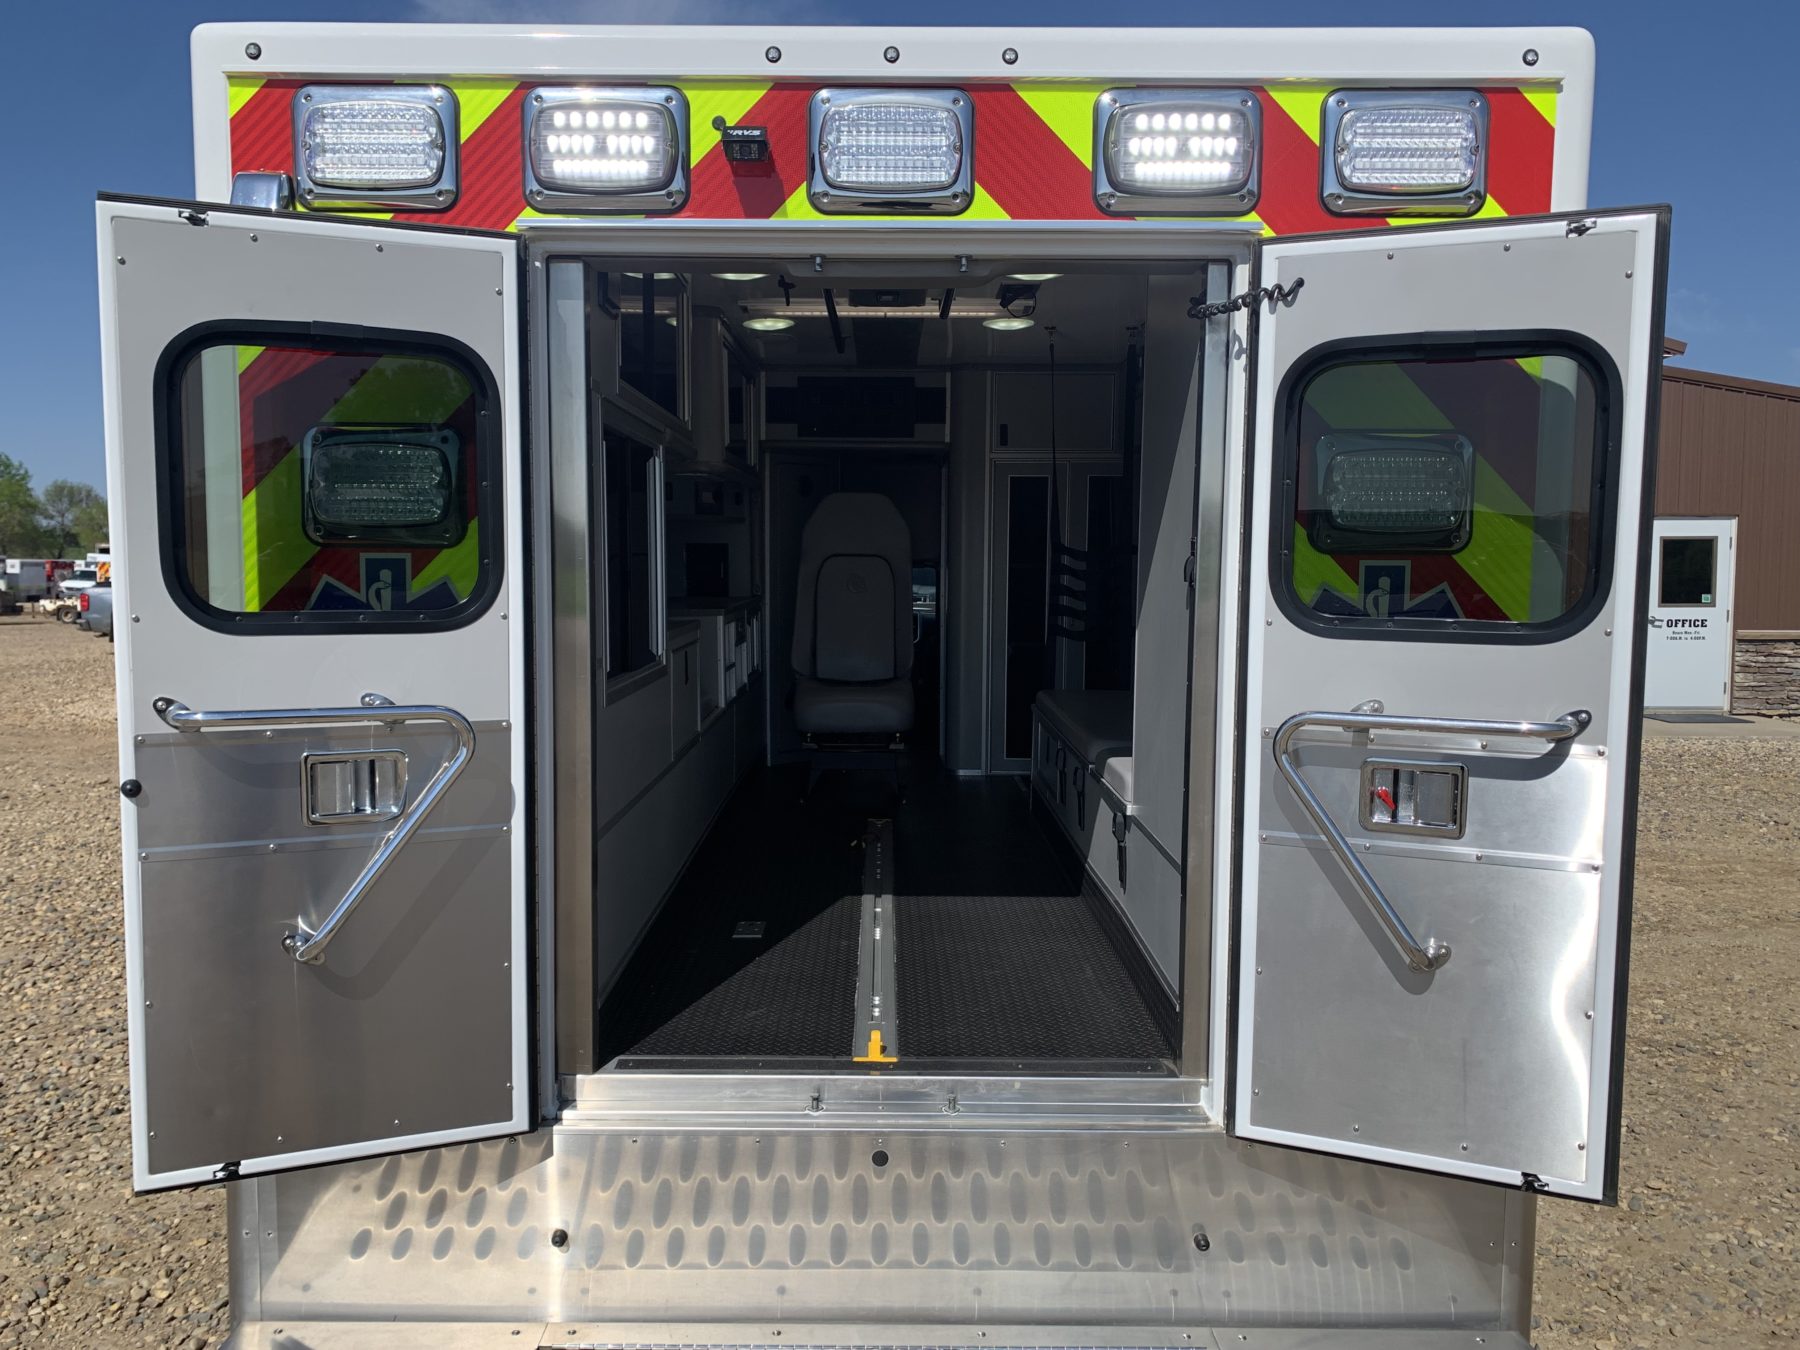 2020 Ram 4500 4x4 Heavy Duty Ambulance For Sale – Picture 9